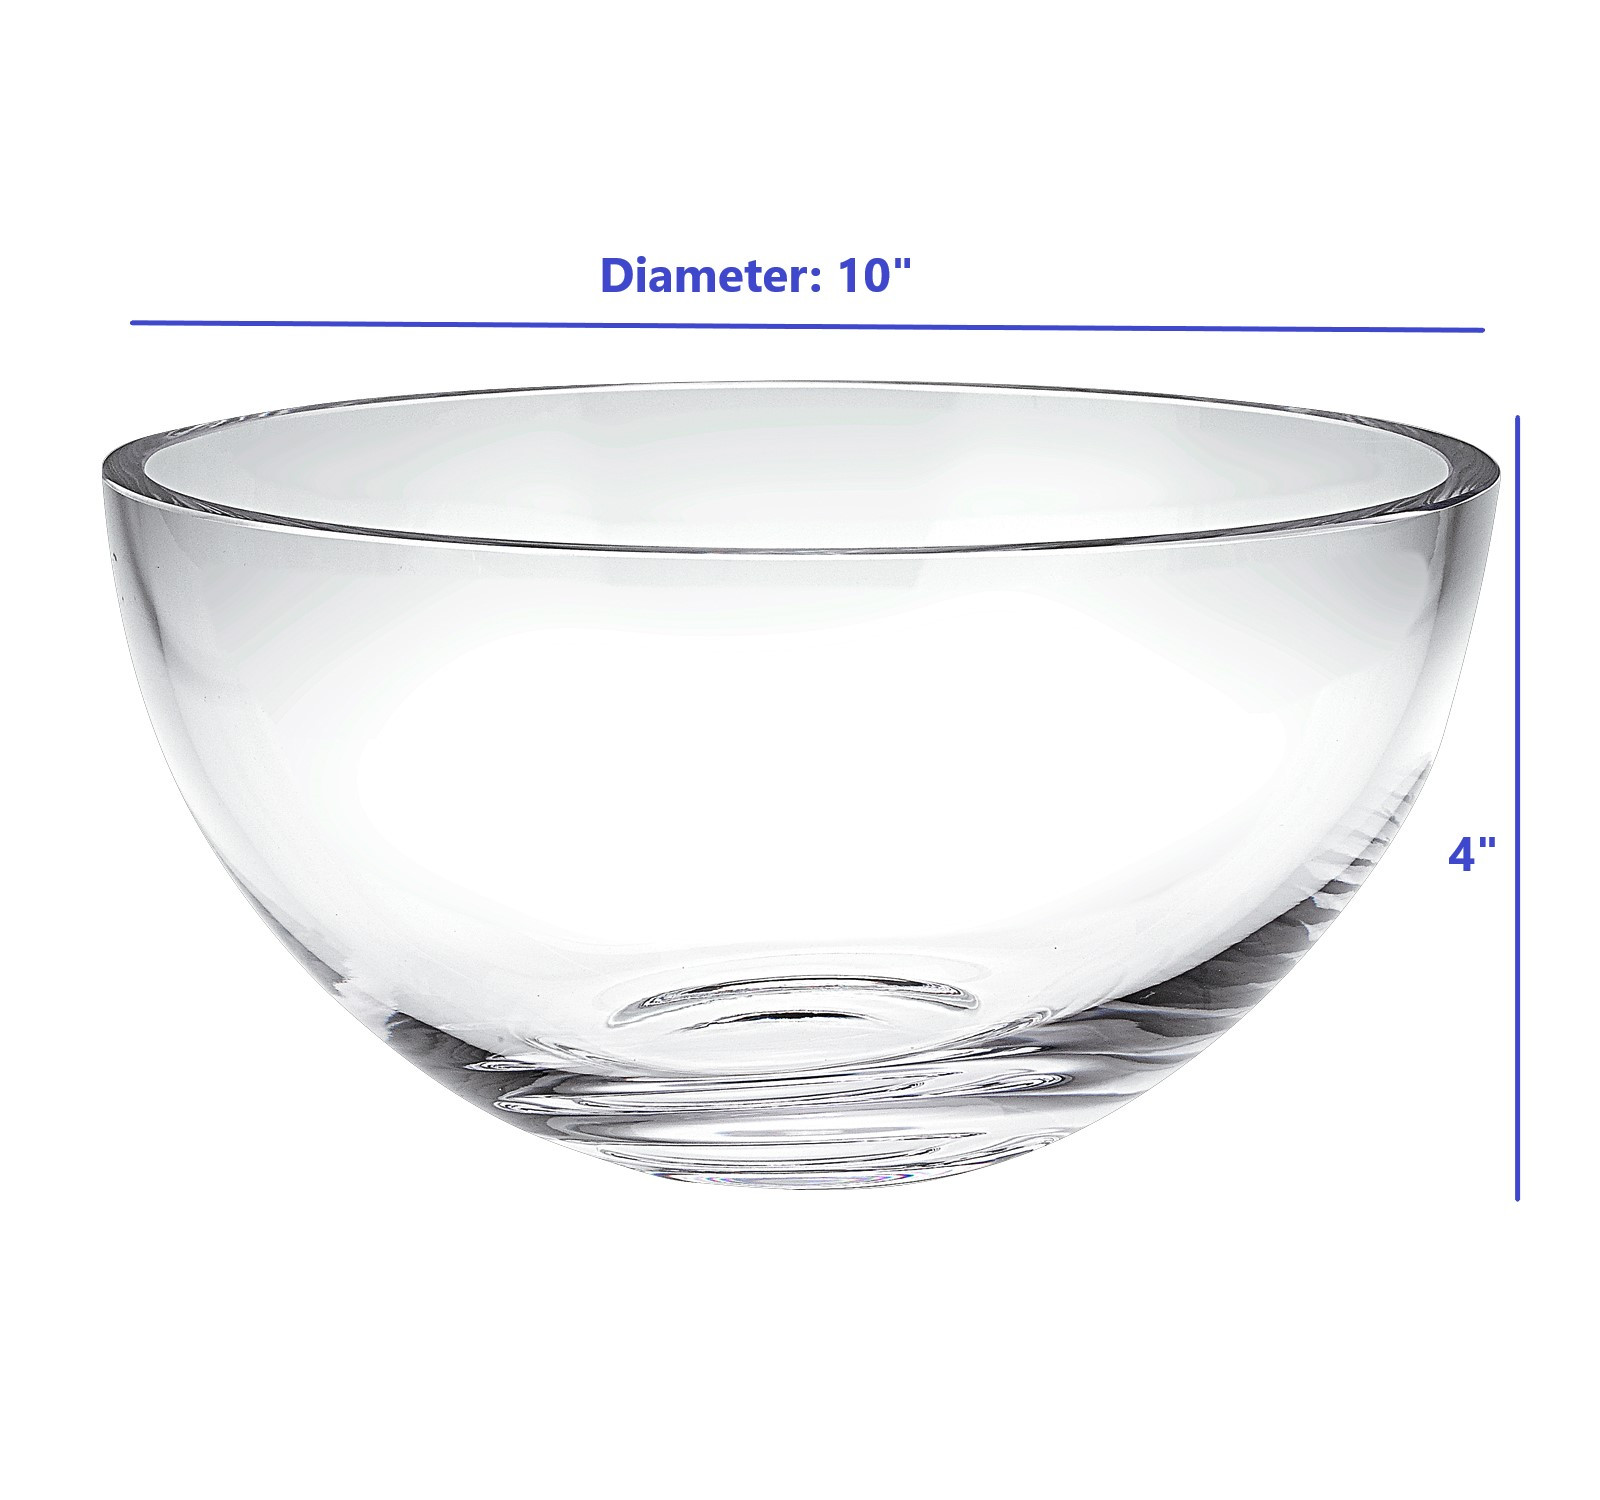 10" Mouth Blown Glass Salad or Fruit Bowl